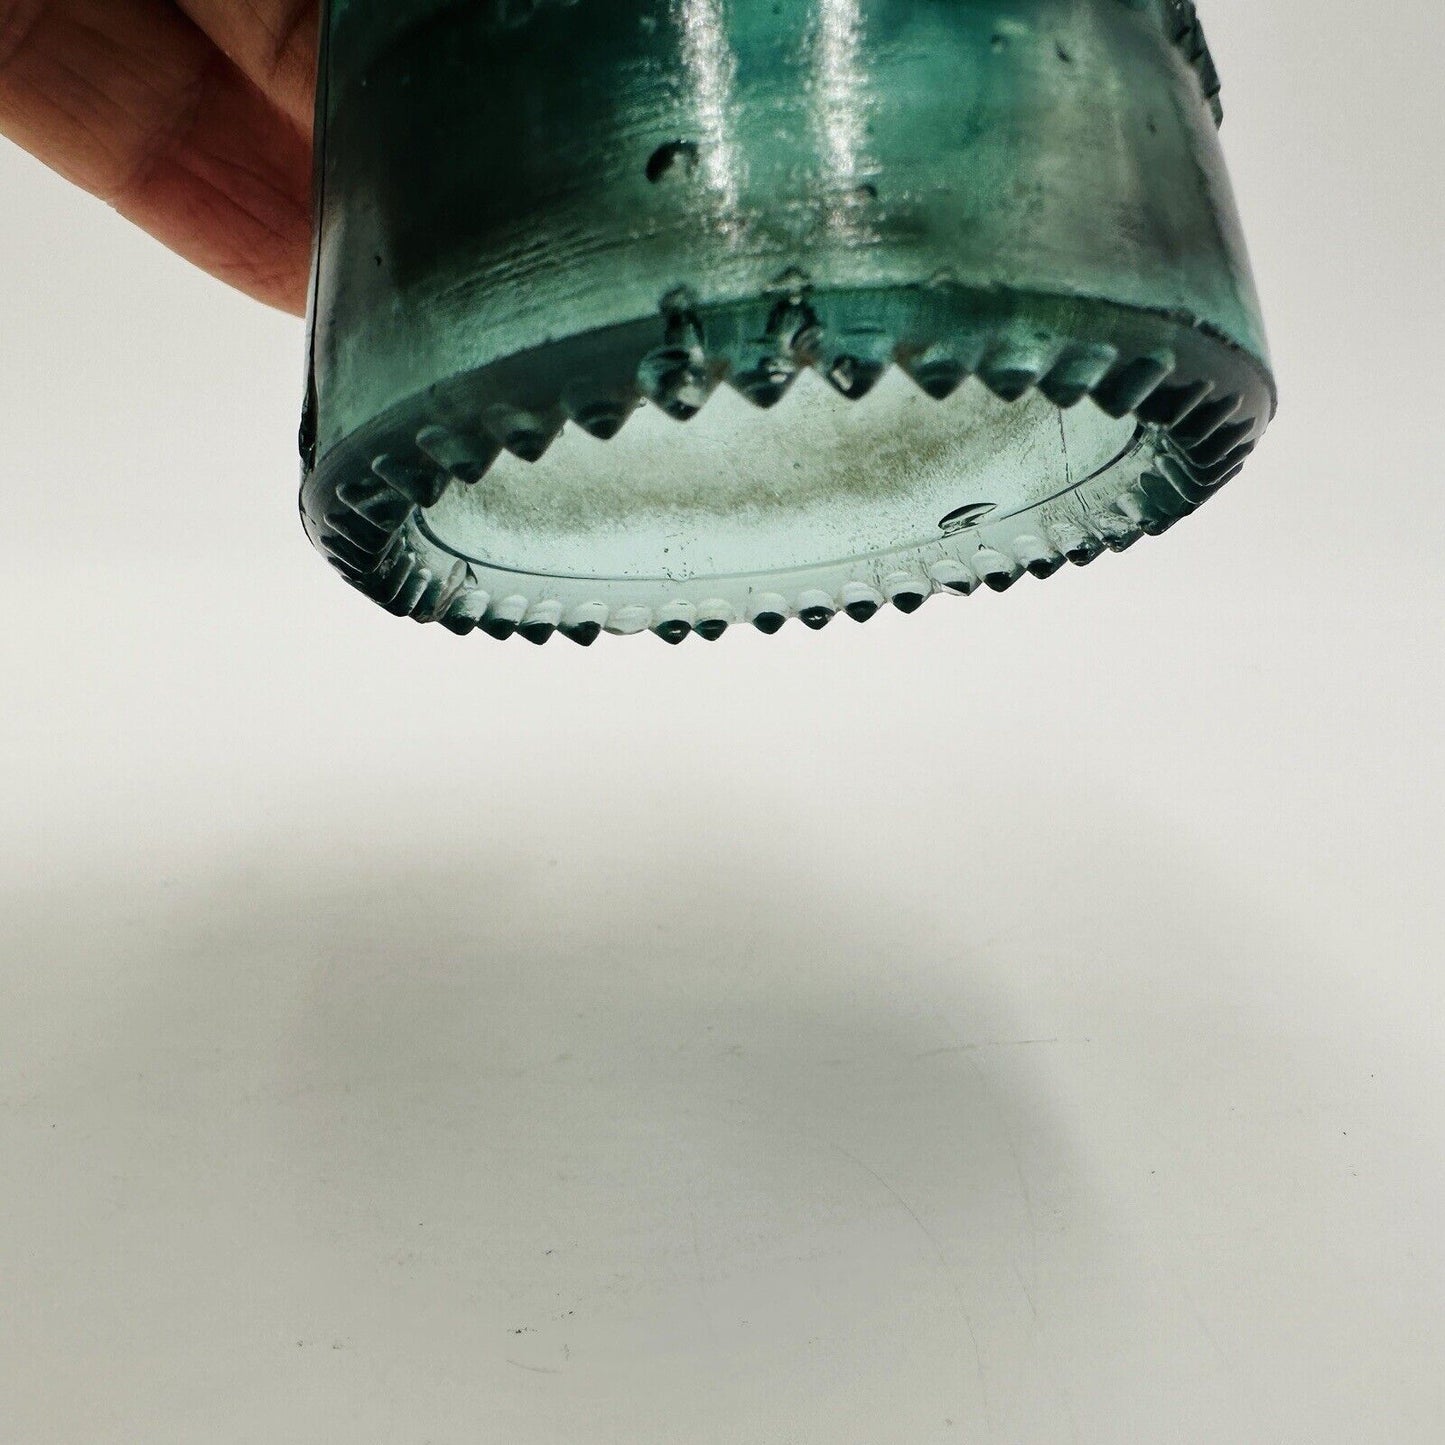 Hemingray  NO 9 glass  Insulator  turquoise EARLY 1893-1895  EMBOSSED antique